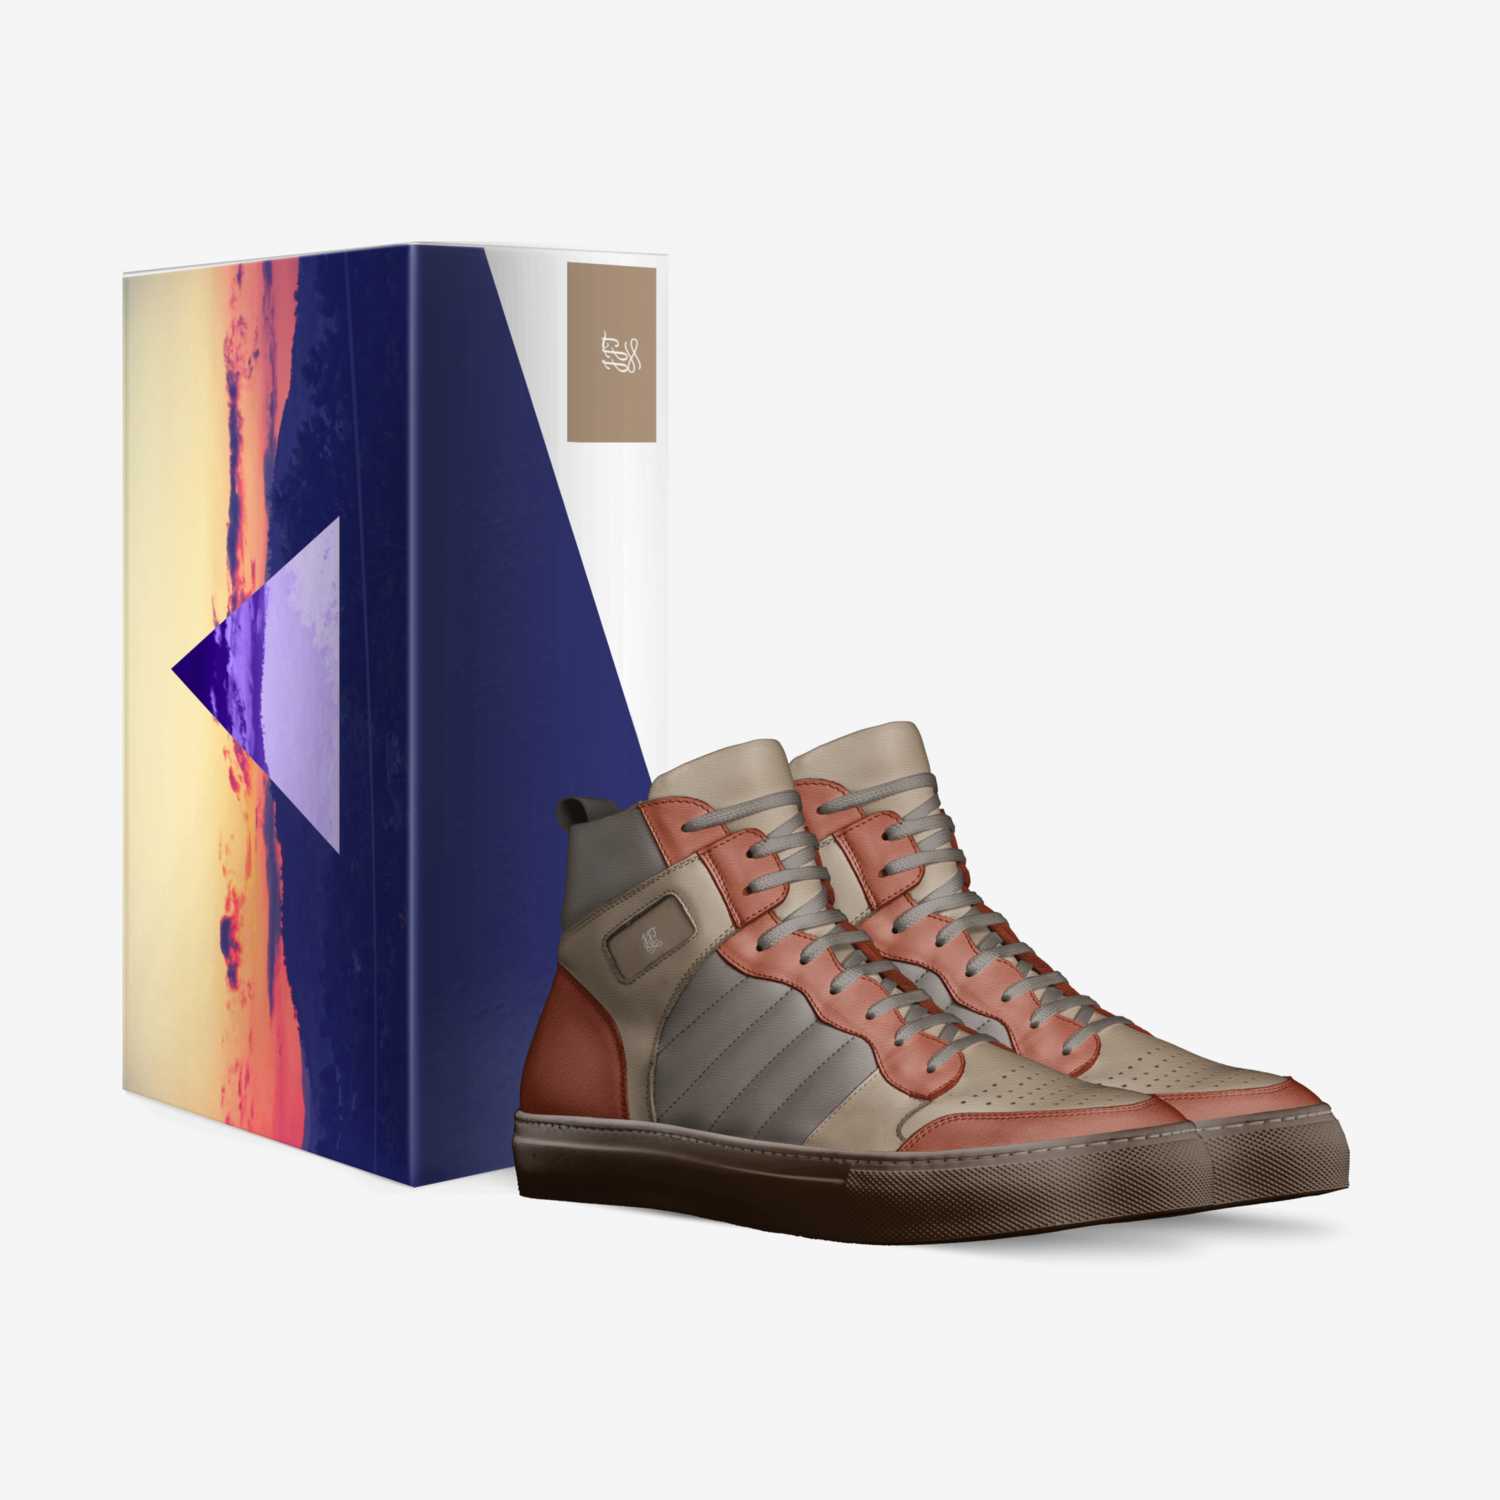 JJT custom made in Italy shoes by Jose Jared Tamez | Box view